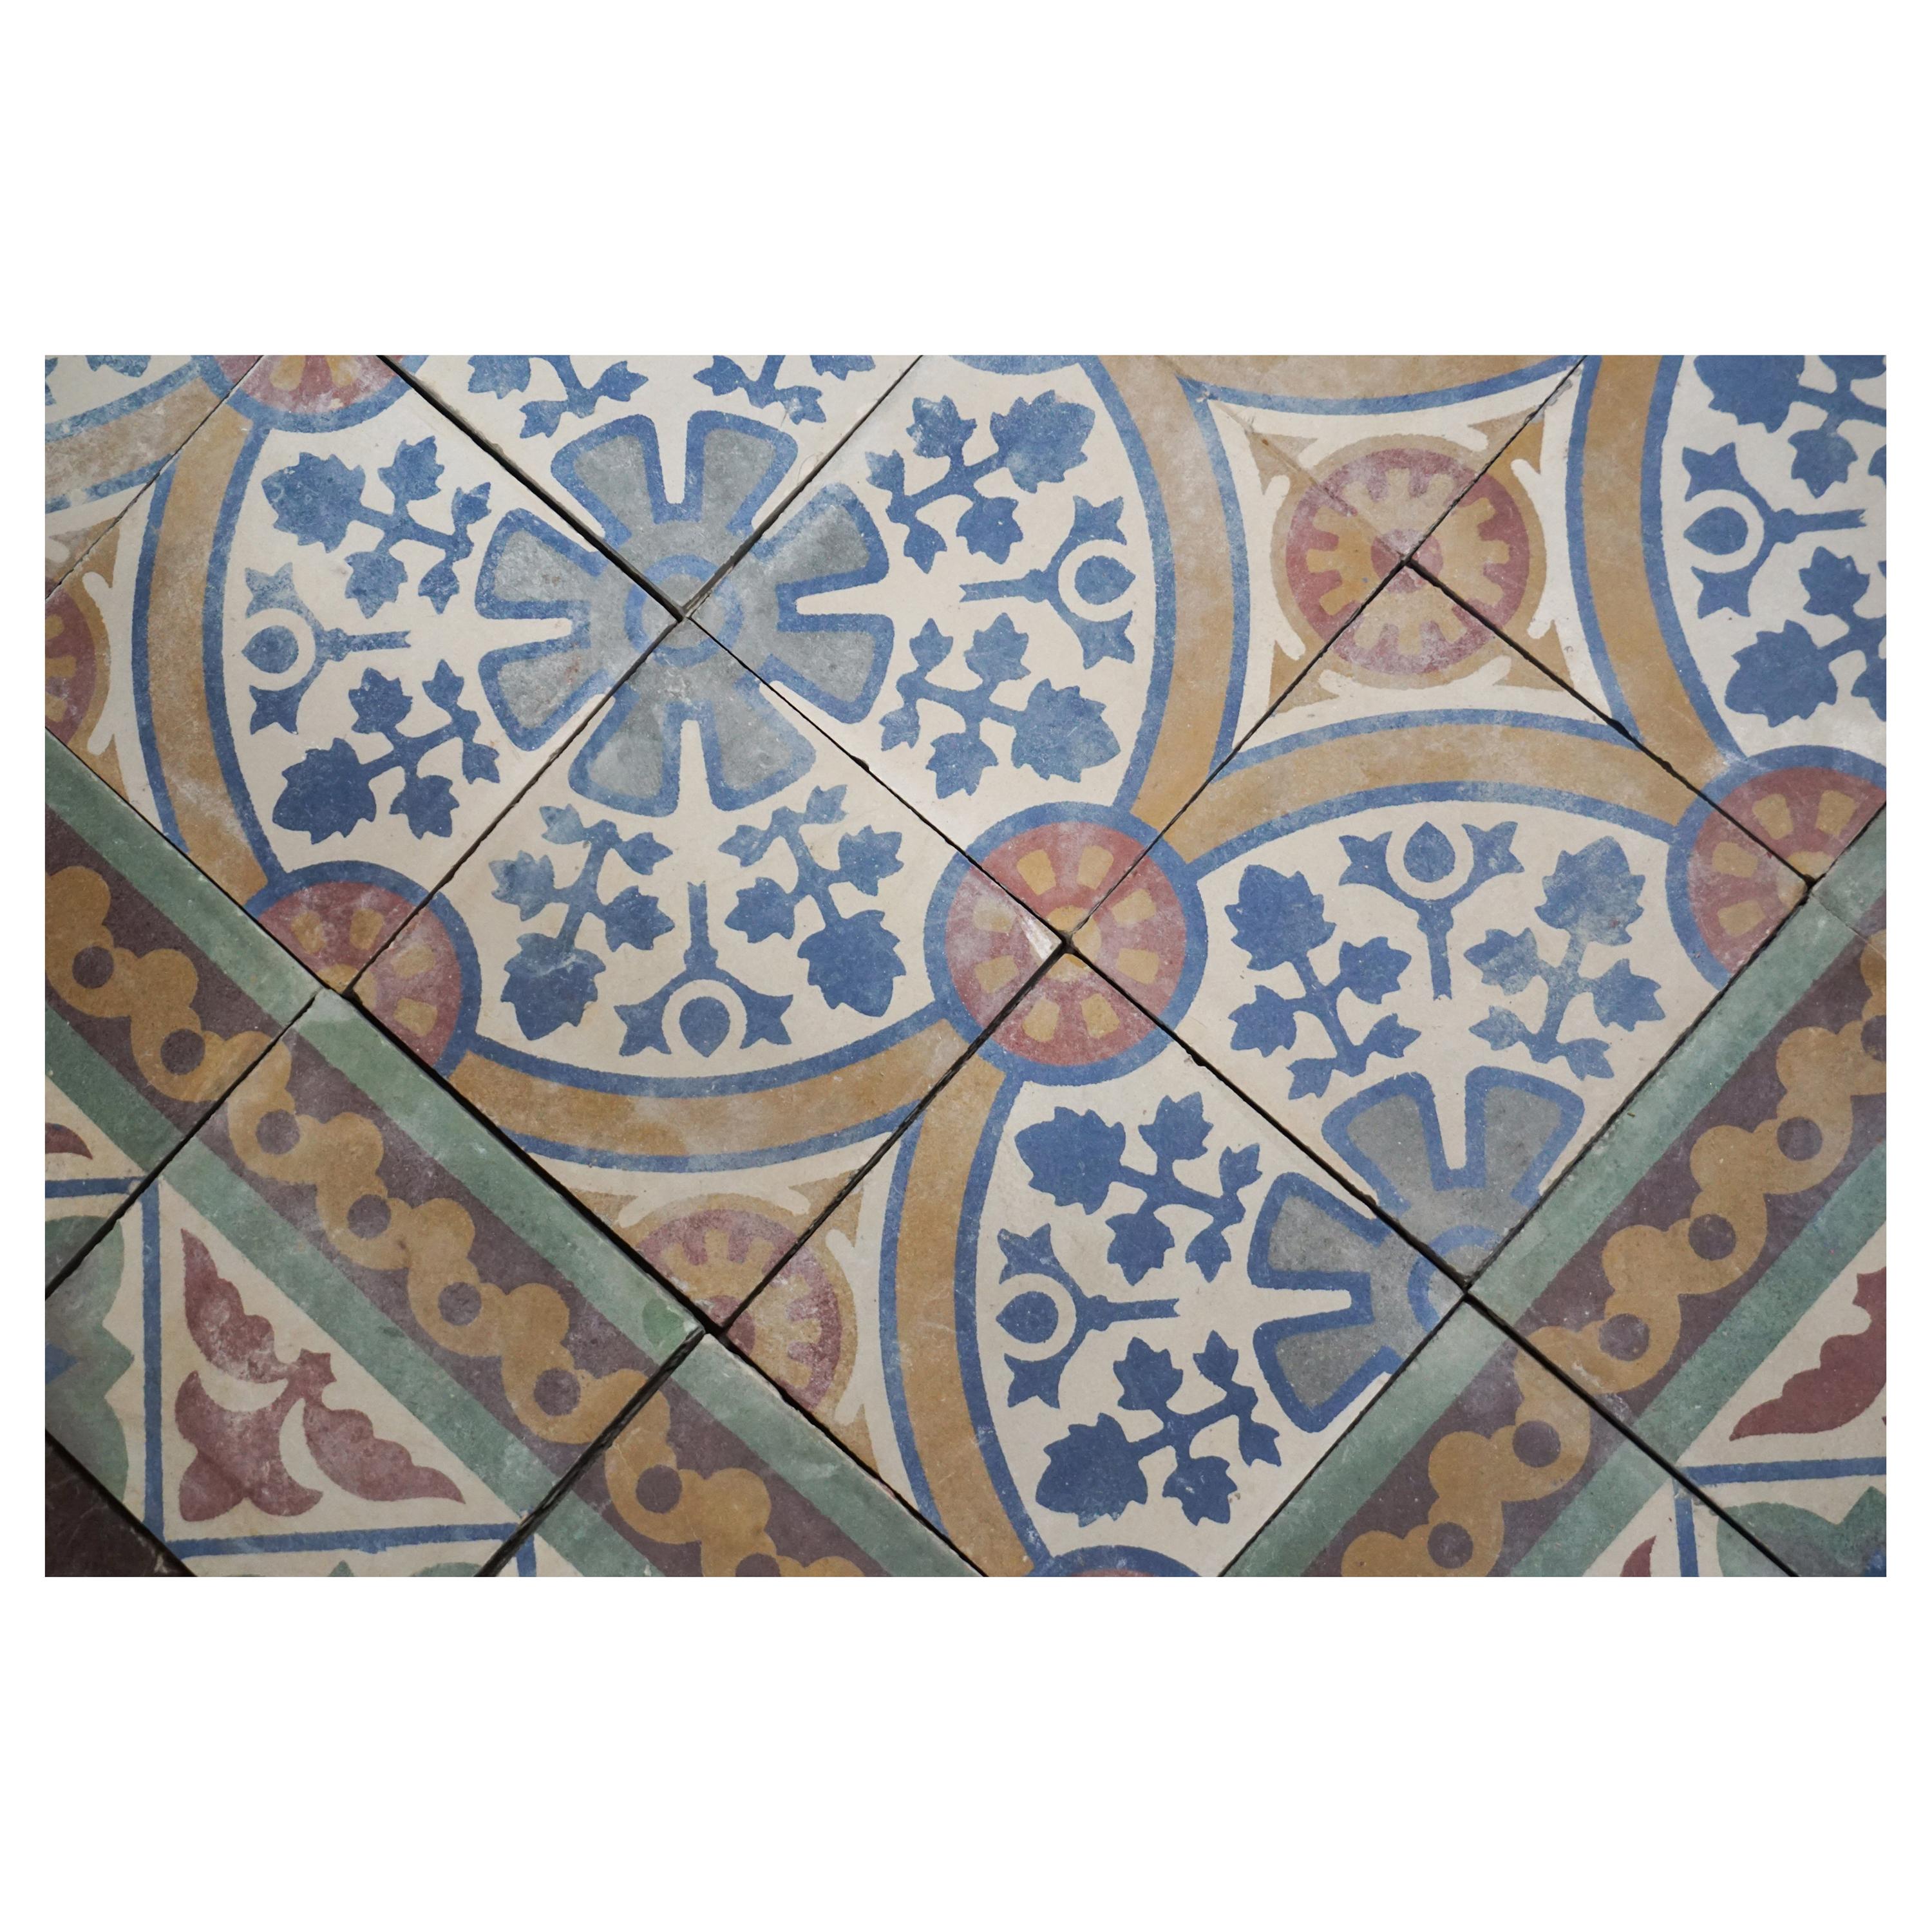 Reclaimed French Tiles, circa 1900